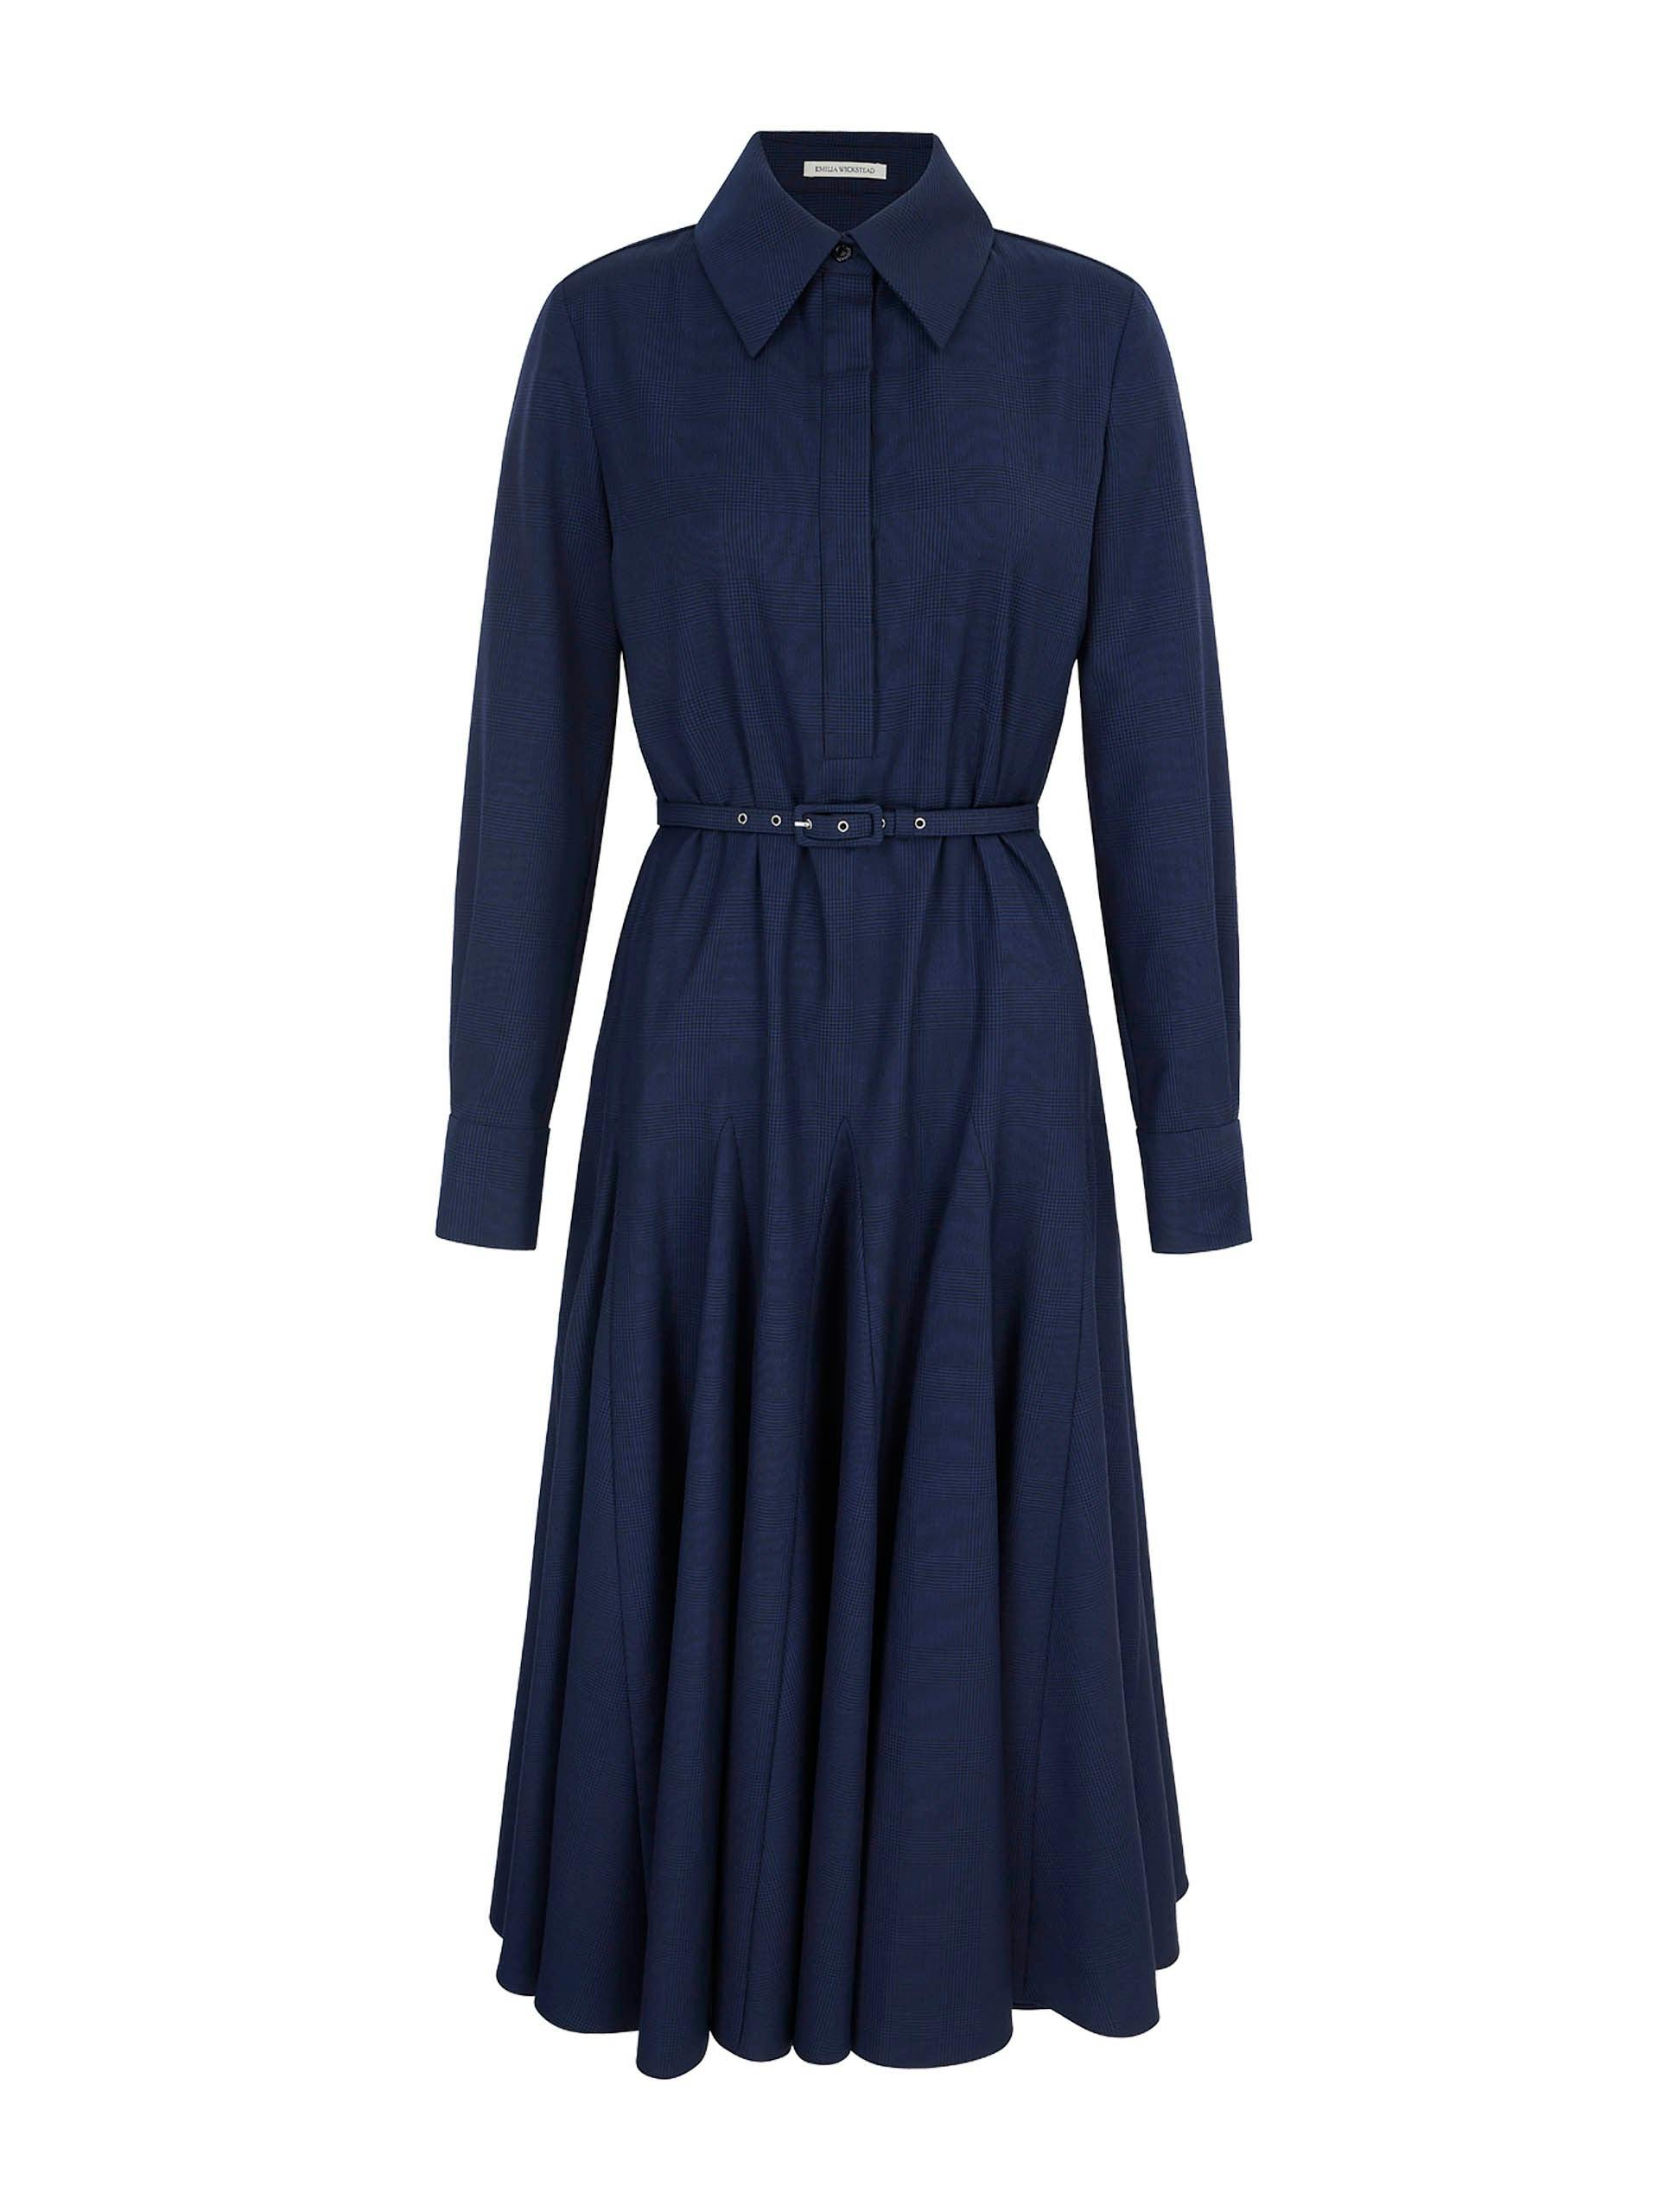 Navy and black Marione dress